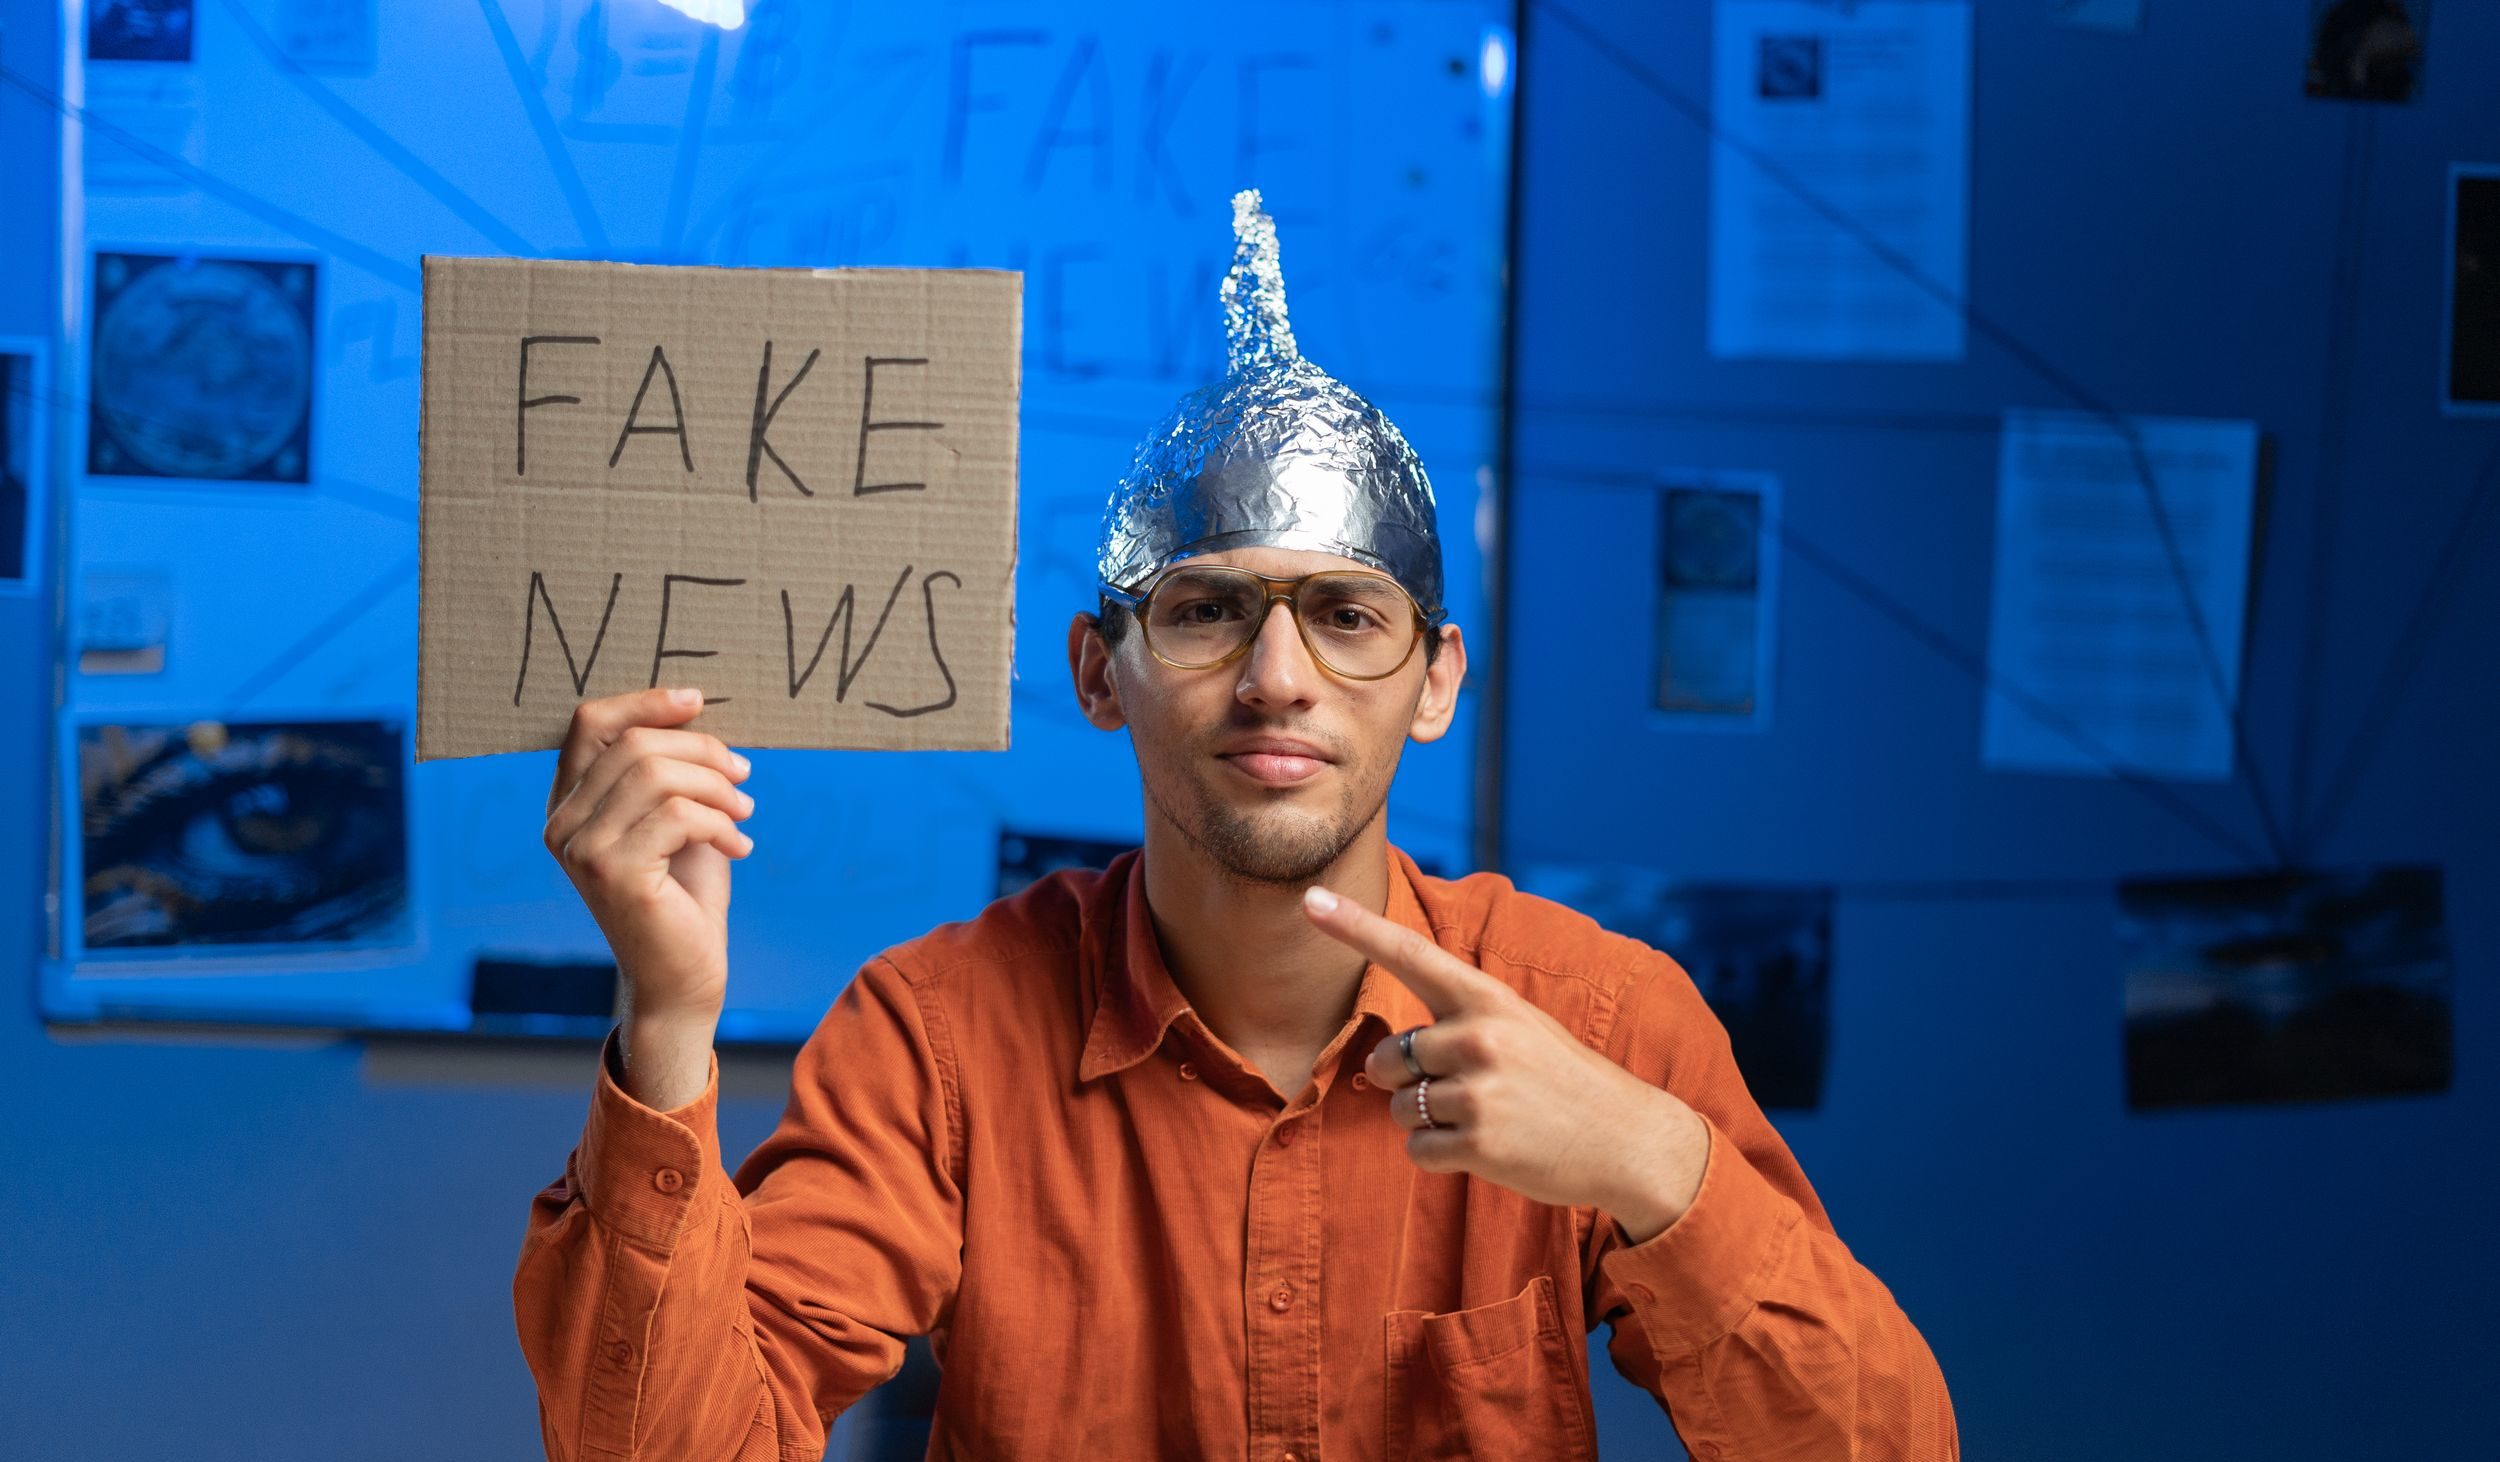 Male conspiracy theorist in a protective foil cap and glasses debunks myths holding poster fake news. Conspiracy theory concept. The schizophrenic works.